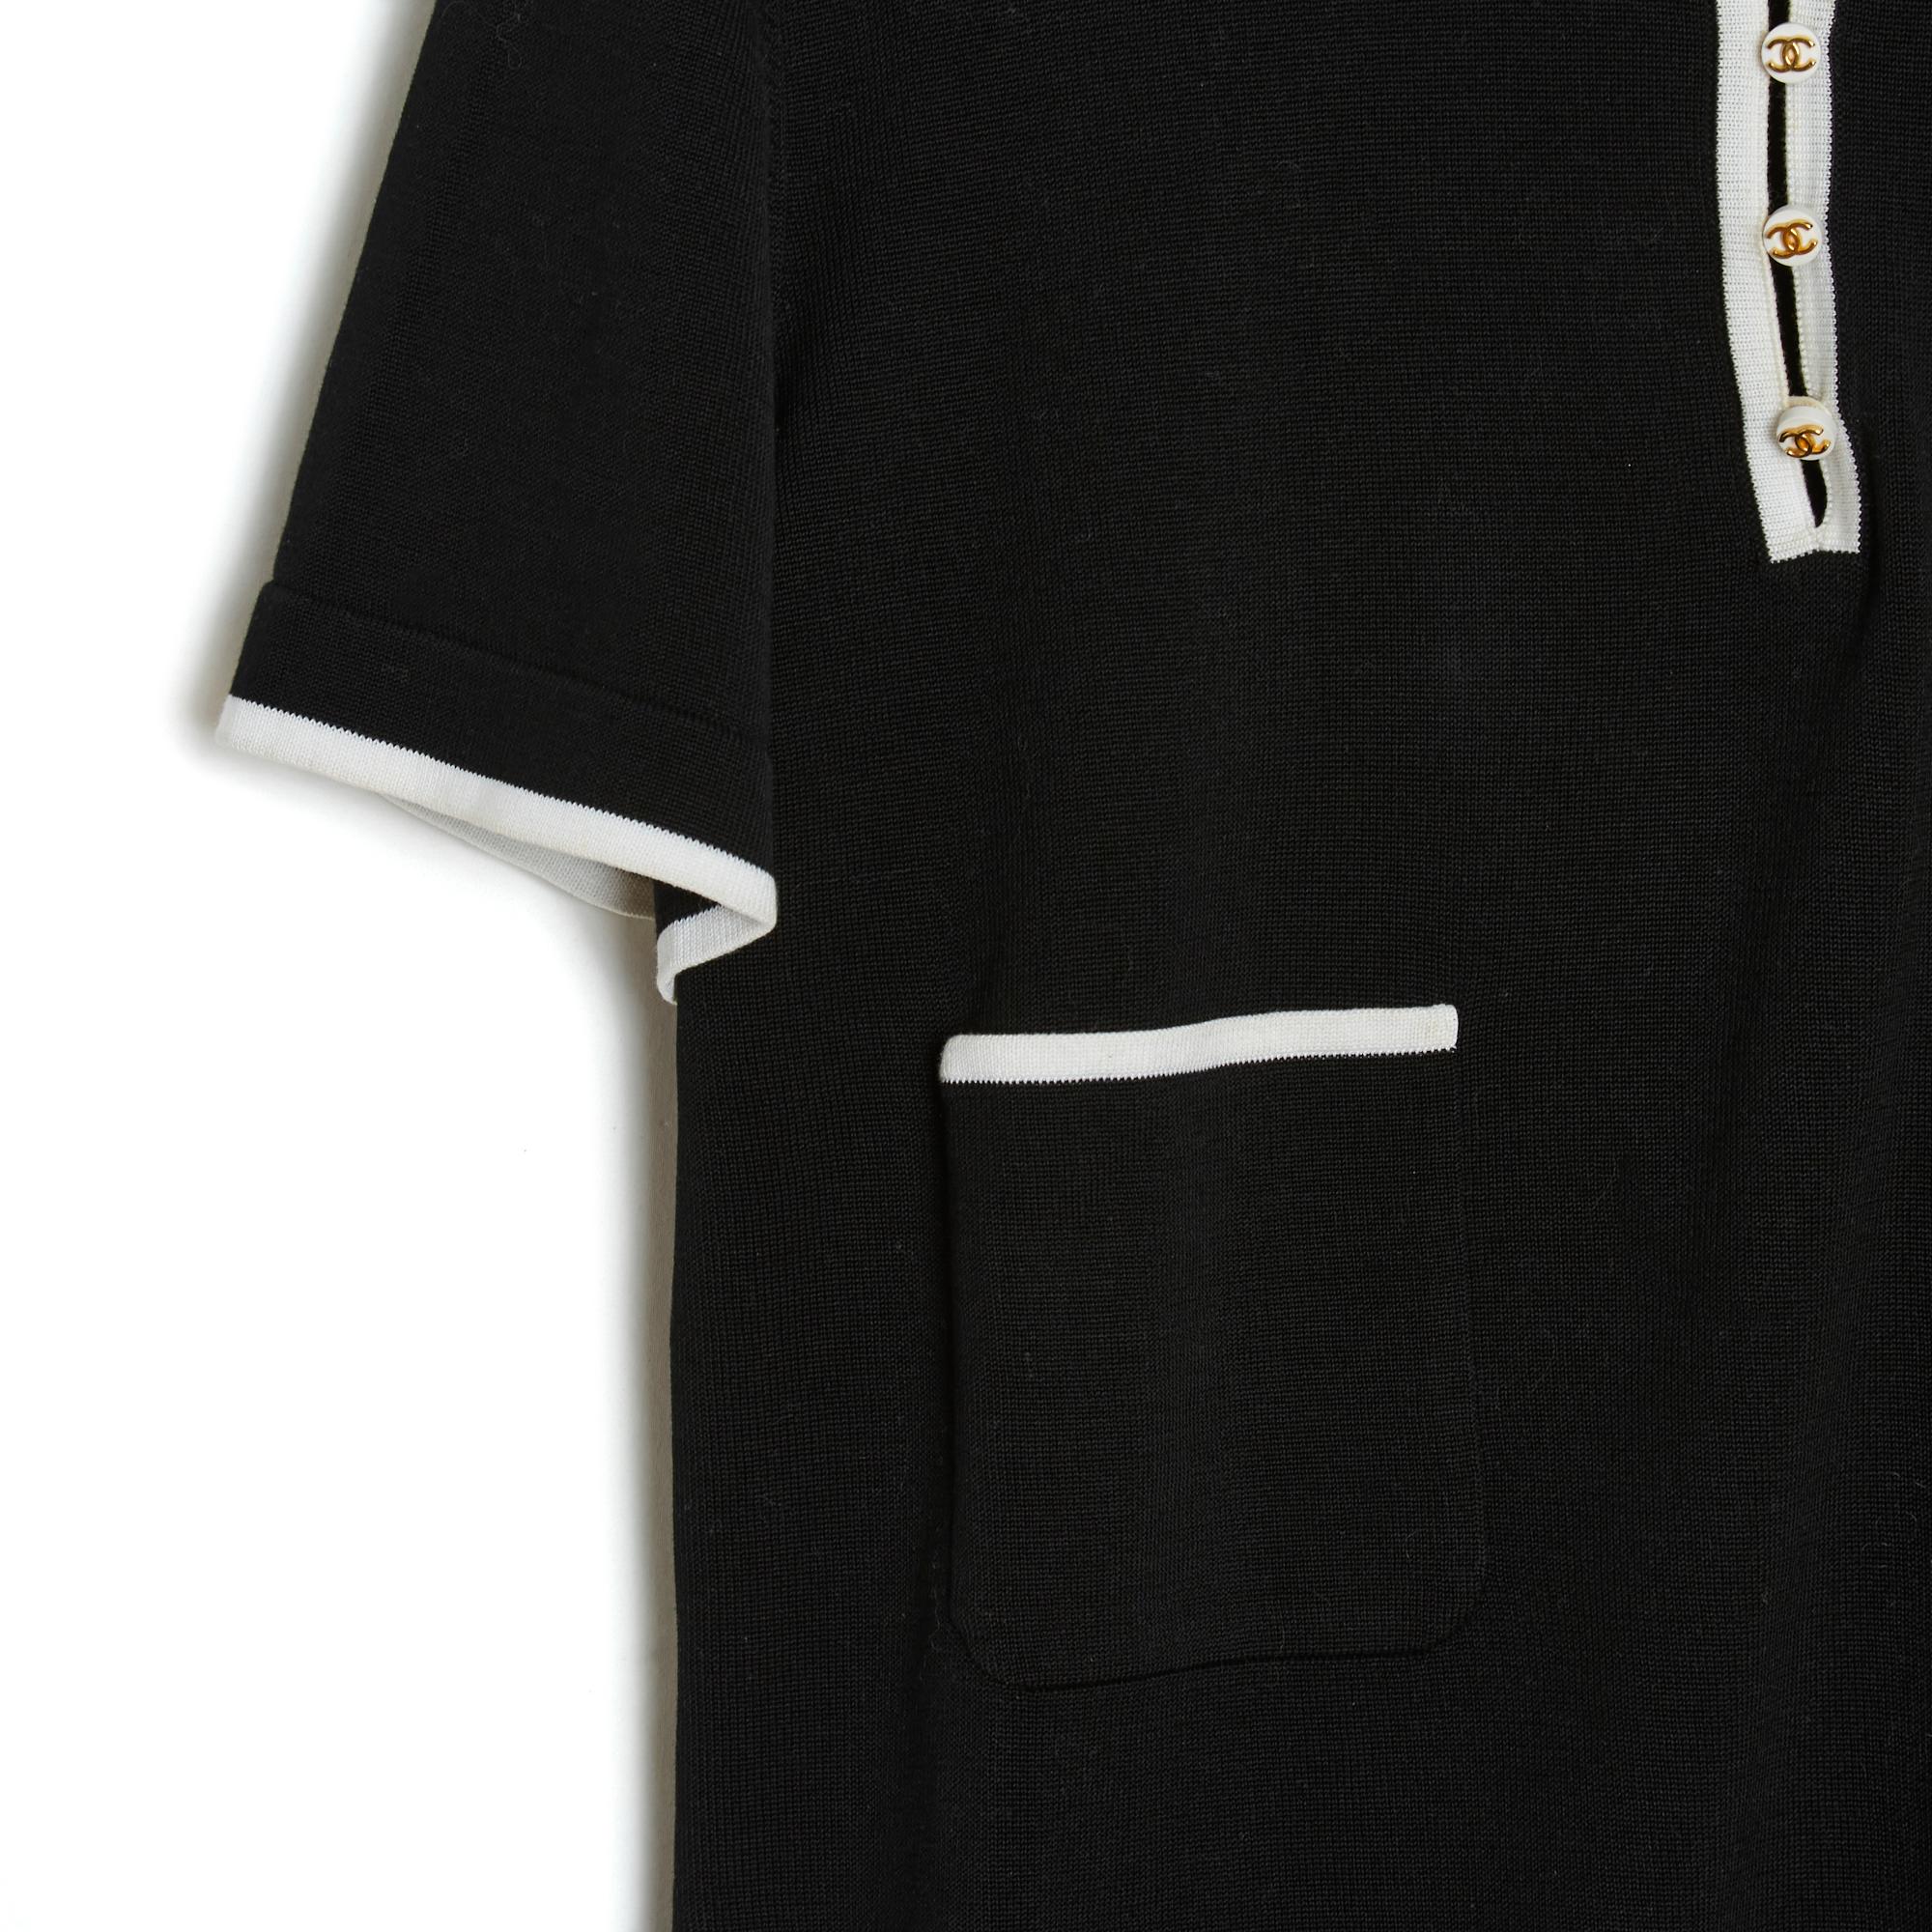 Chanel polo top in black cotton knit, contrasting edge on the lower pockets, sleeves, bottom and collar, closed with 5 ecru buttons with CC logo in gold metal, unlined. Please note, size indicated 46, but the measurements indicate a 38 FR, slightly